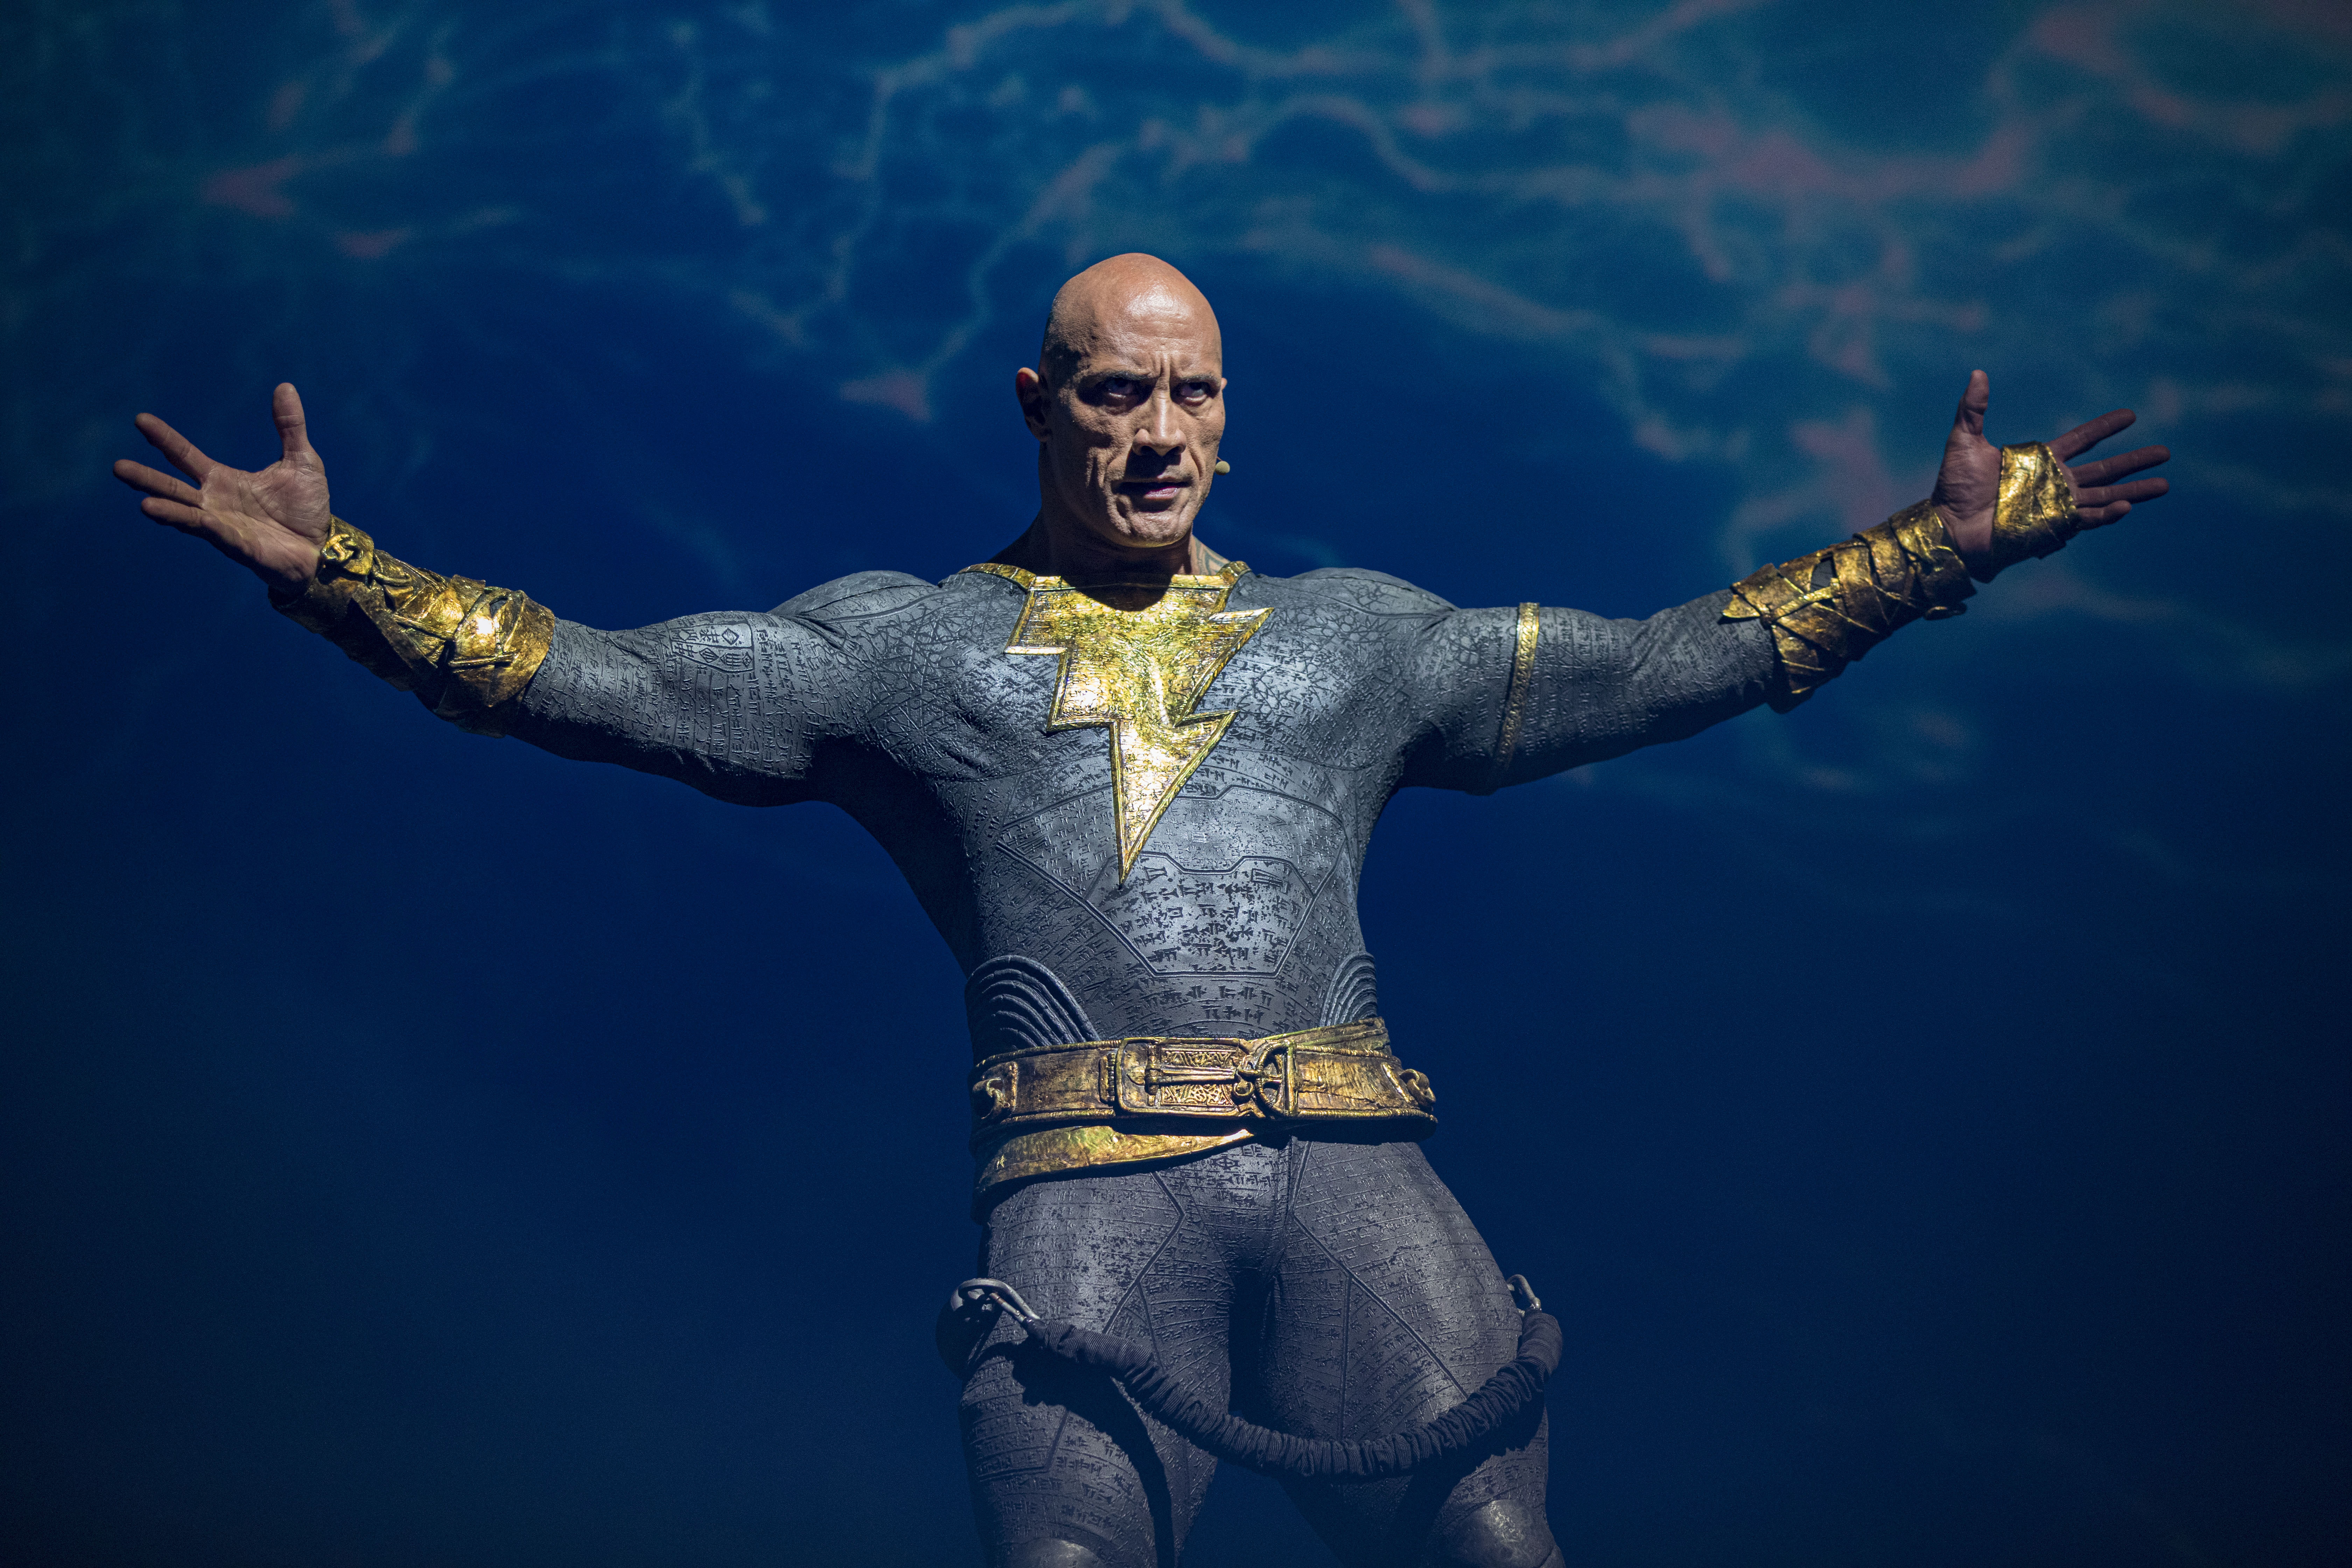 No redemption for the whiteness in Black Adam